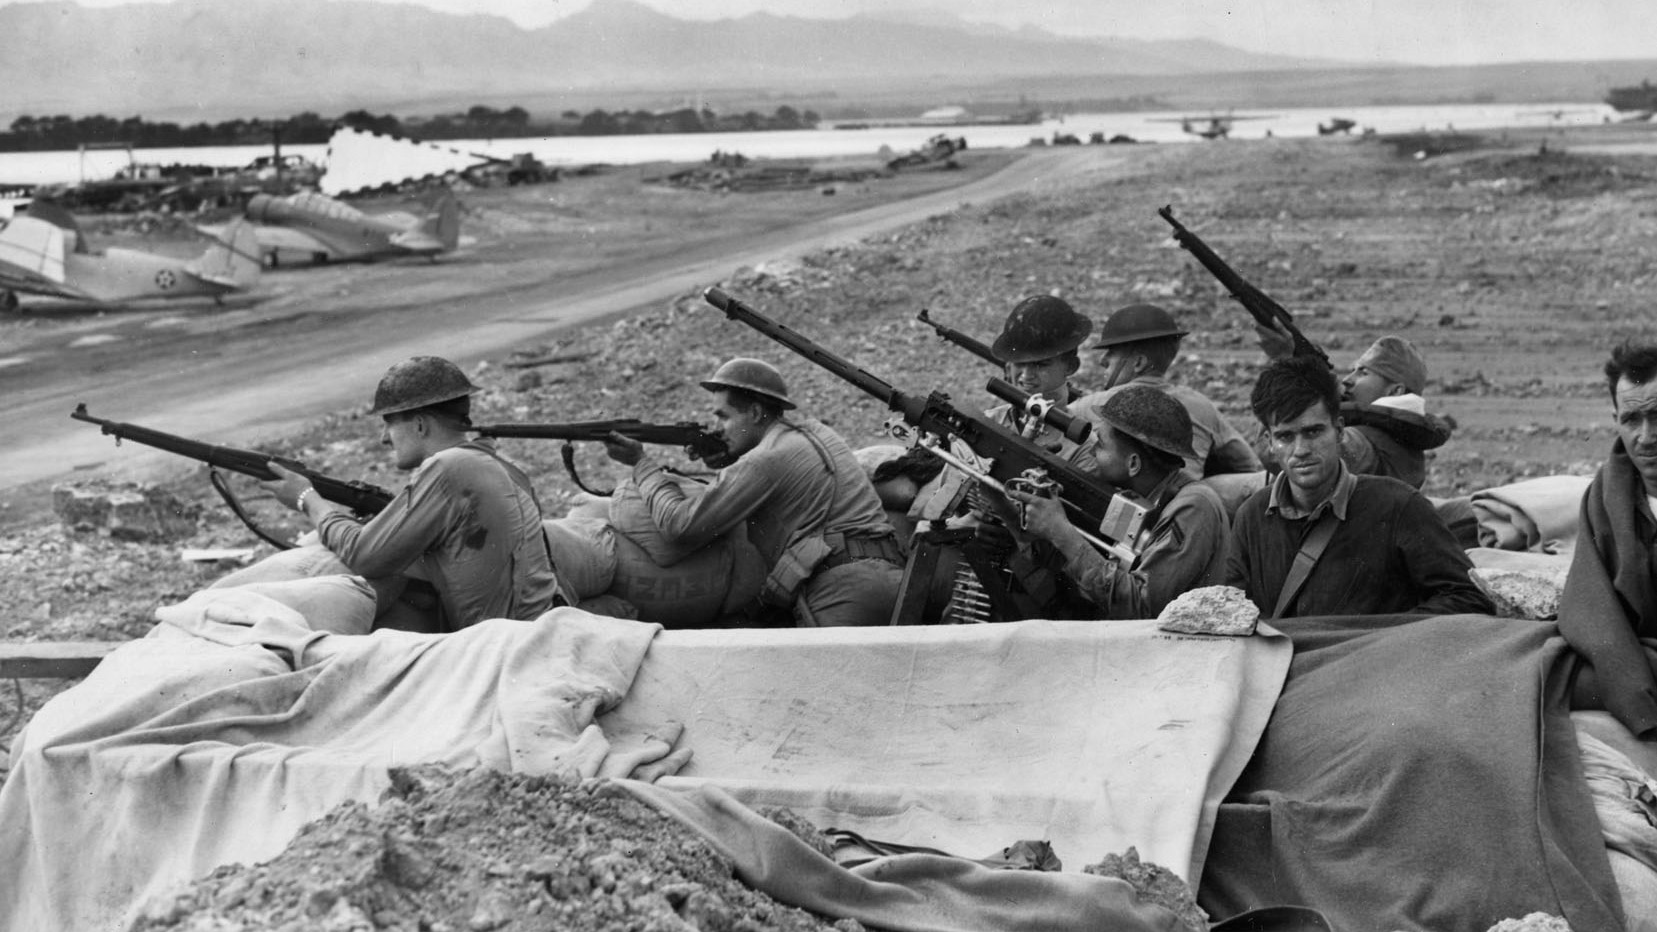 In the aftermath of the Pearl Harbor attack, U.S. Marines and soldiers stationed across Oahu were nervous and often fired at anything remotely suspicious. These troops man a sandbag gun emplacement adjacent to an airfield, their rifles and machine gun at the ready.